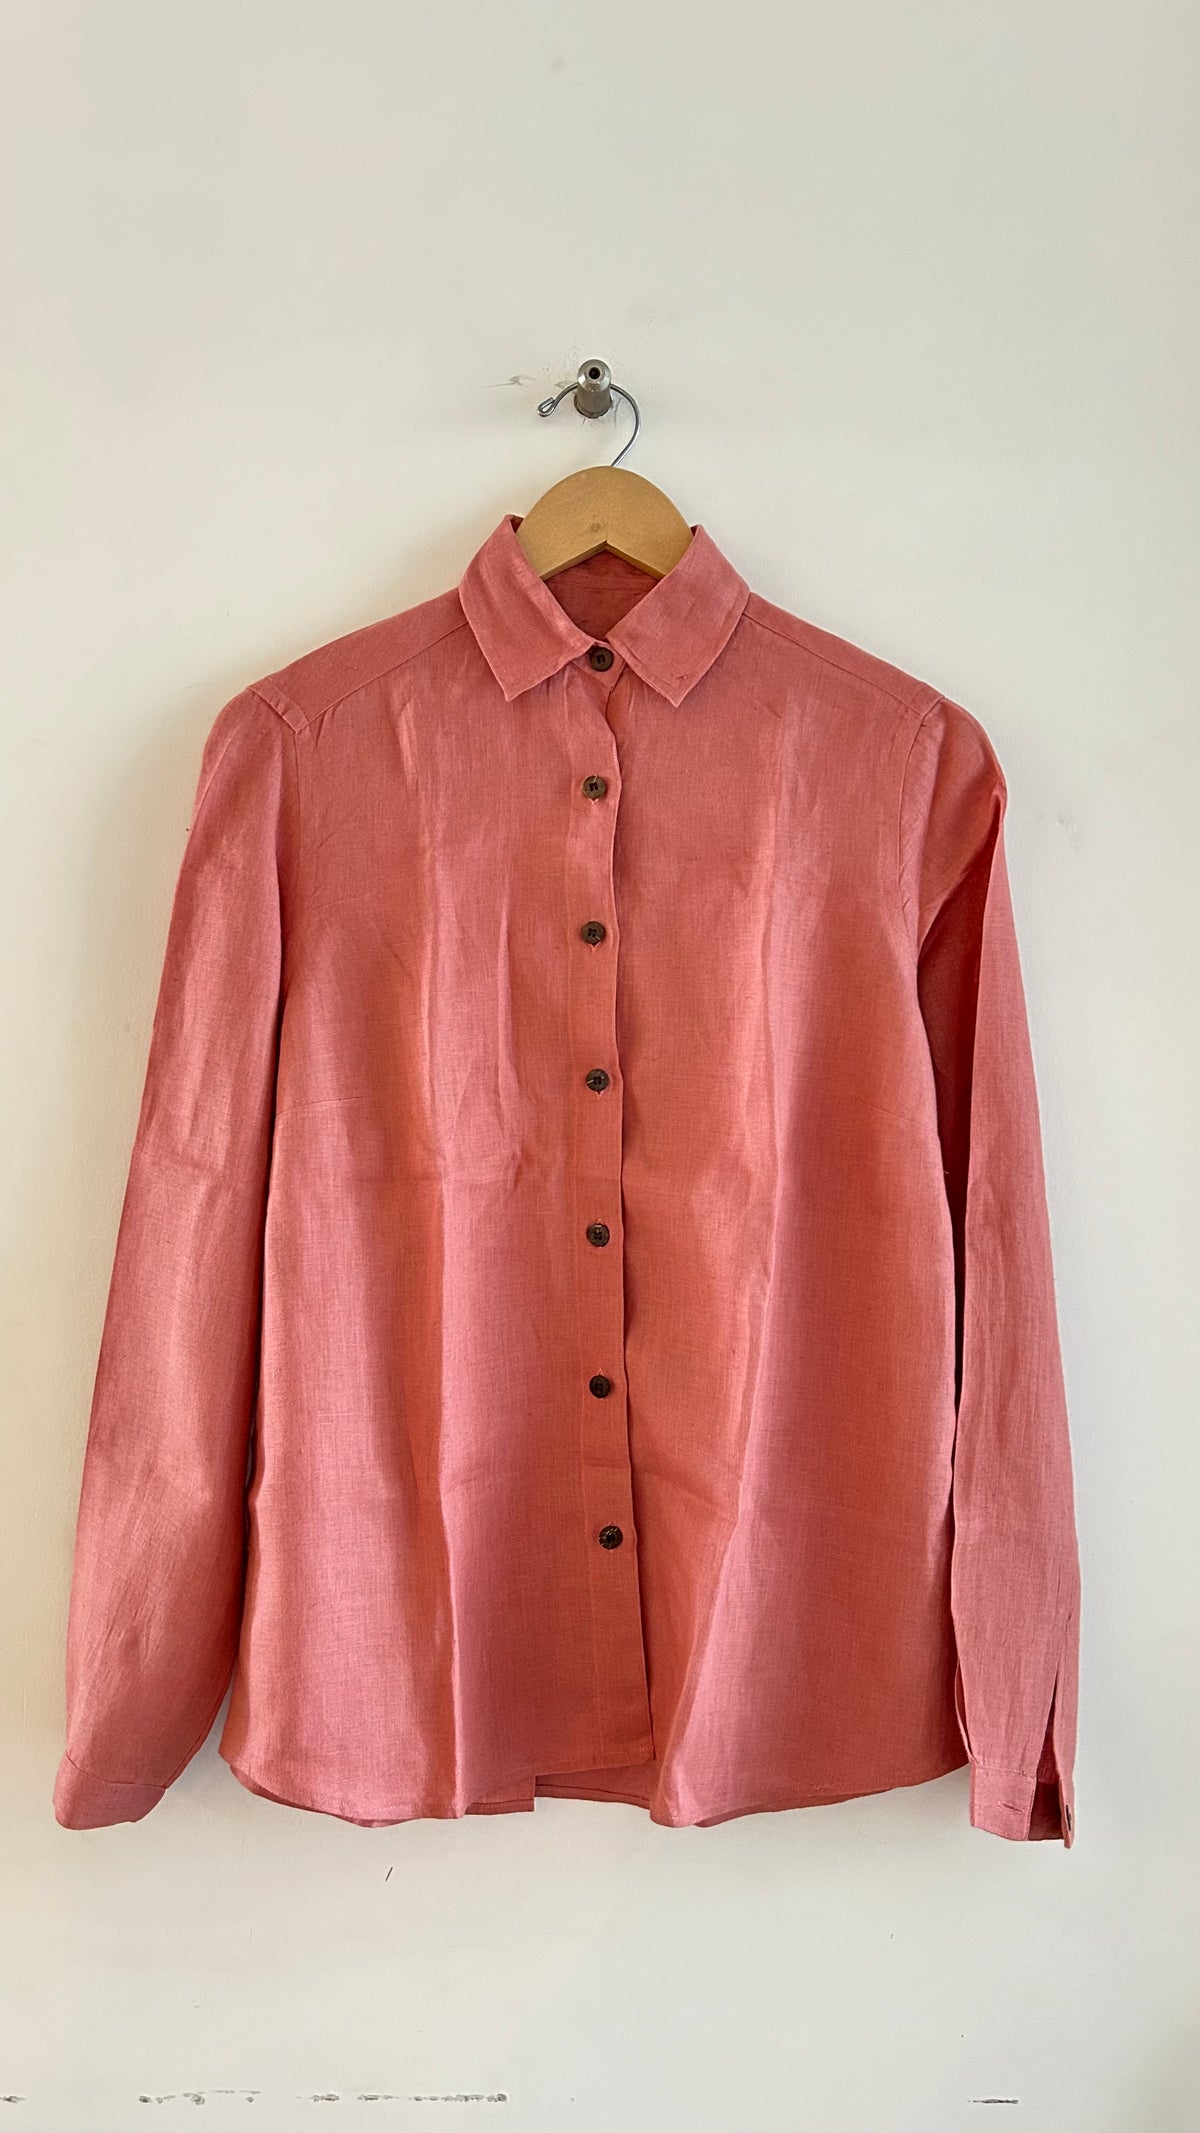 Do me a solid - Salmon Shirt